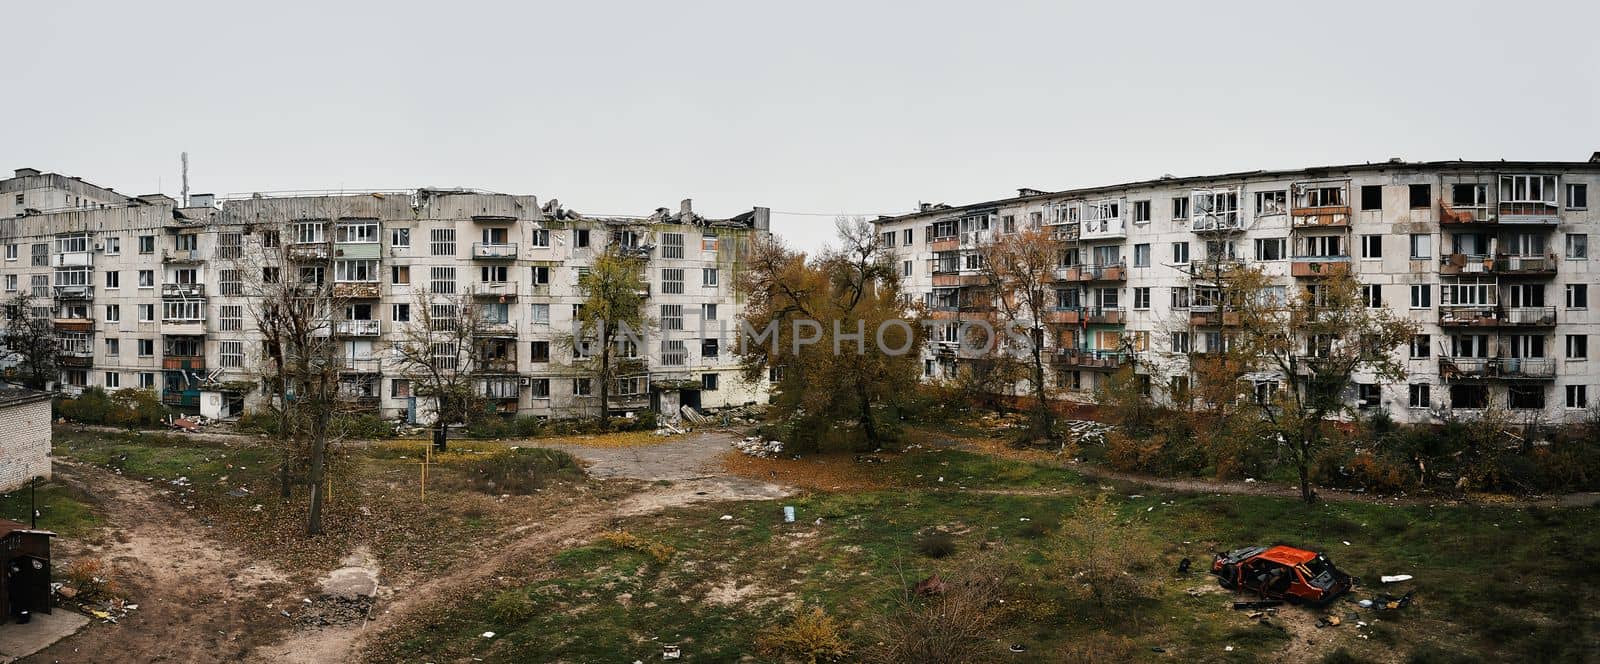 Yard of destroyed apartment buildings in the war zone. Damage to a house as a result of artillery shelling. War in residential areas, broken windows and burned apartments. Armed conflict in Ukraine.